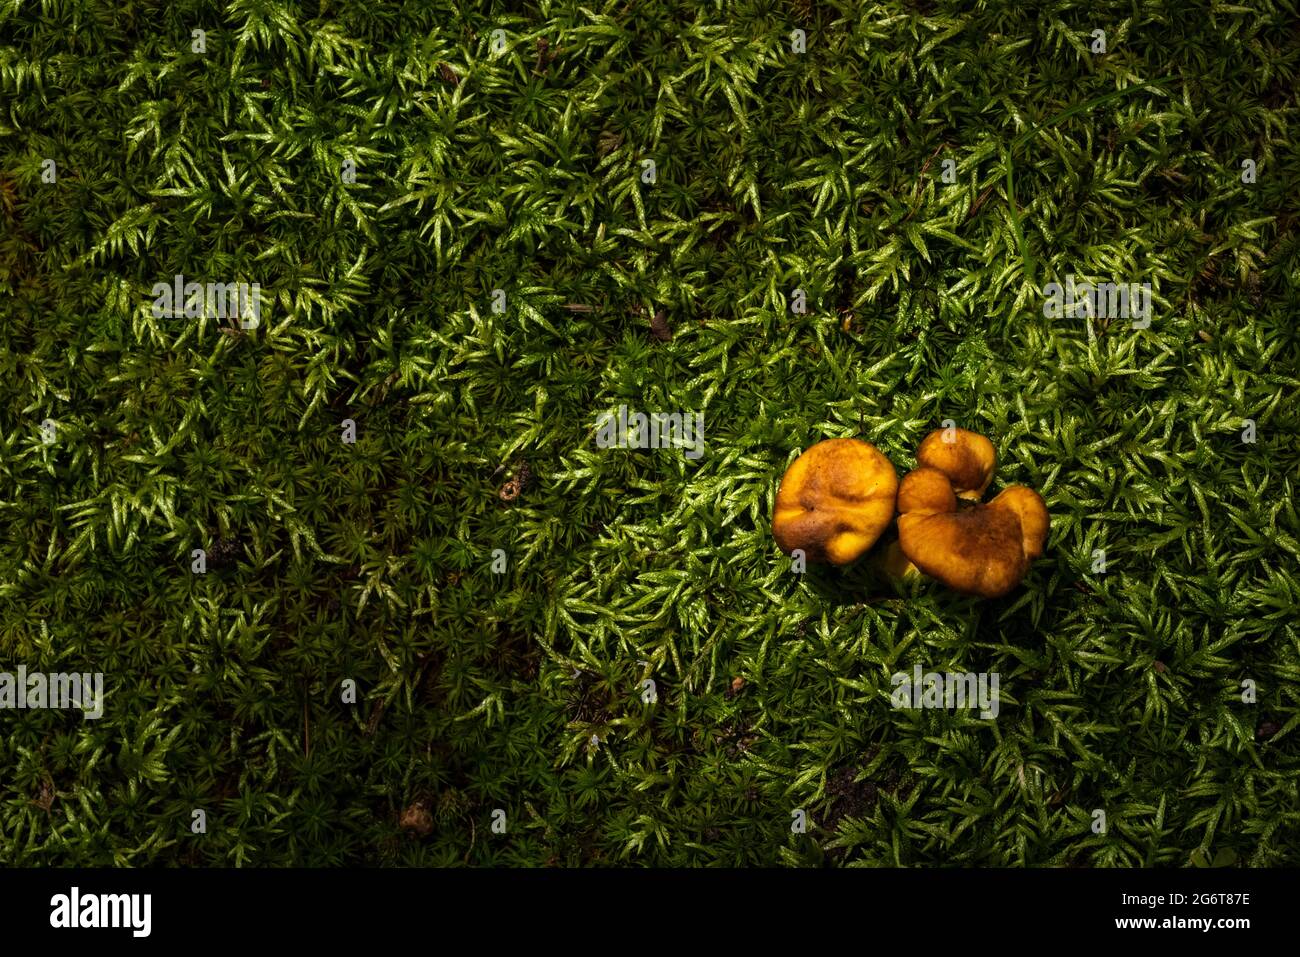 Mushrooms sprout from the mossy ground under a live oak in Fairhope, Alabama. Stock Photo